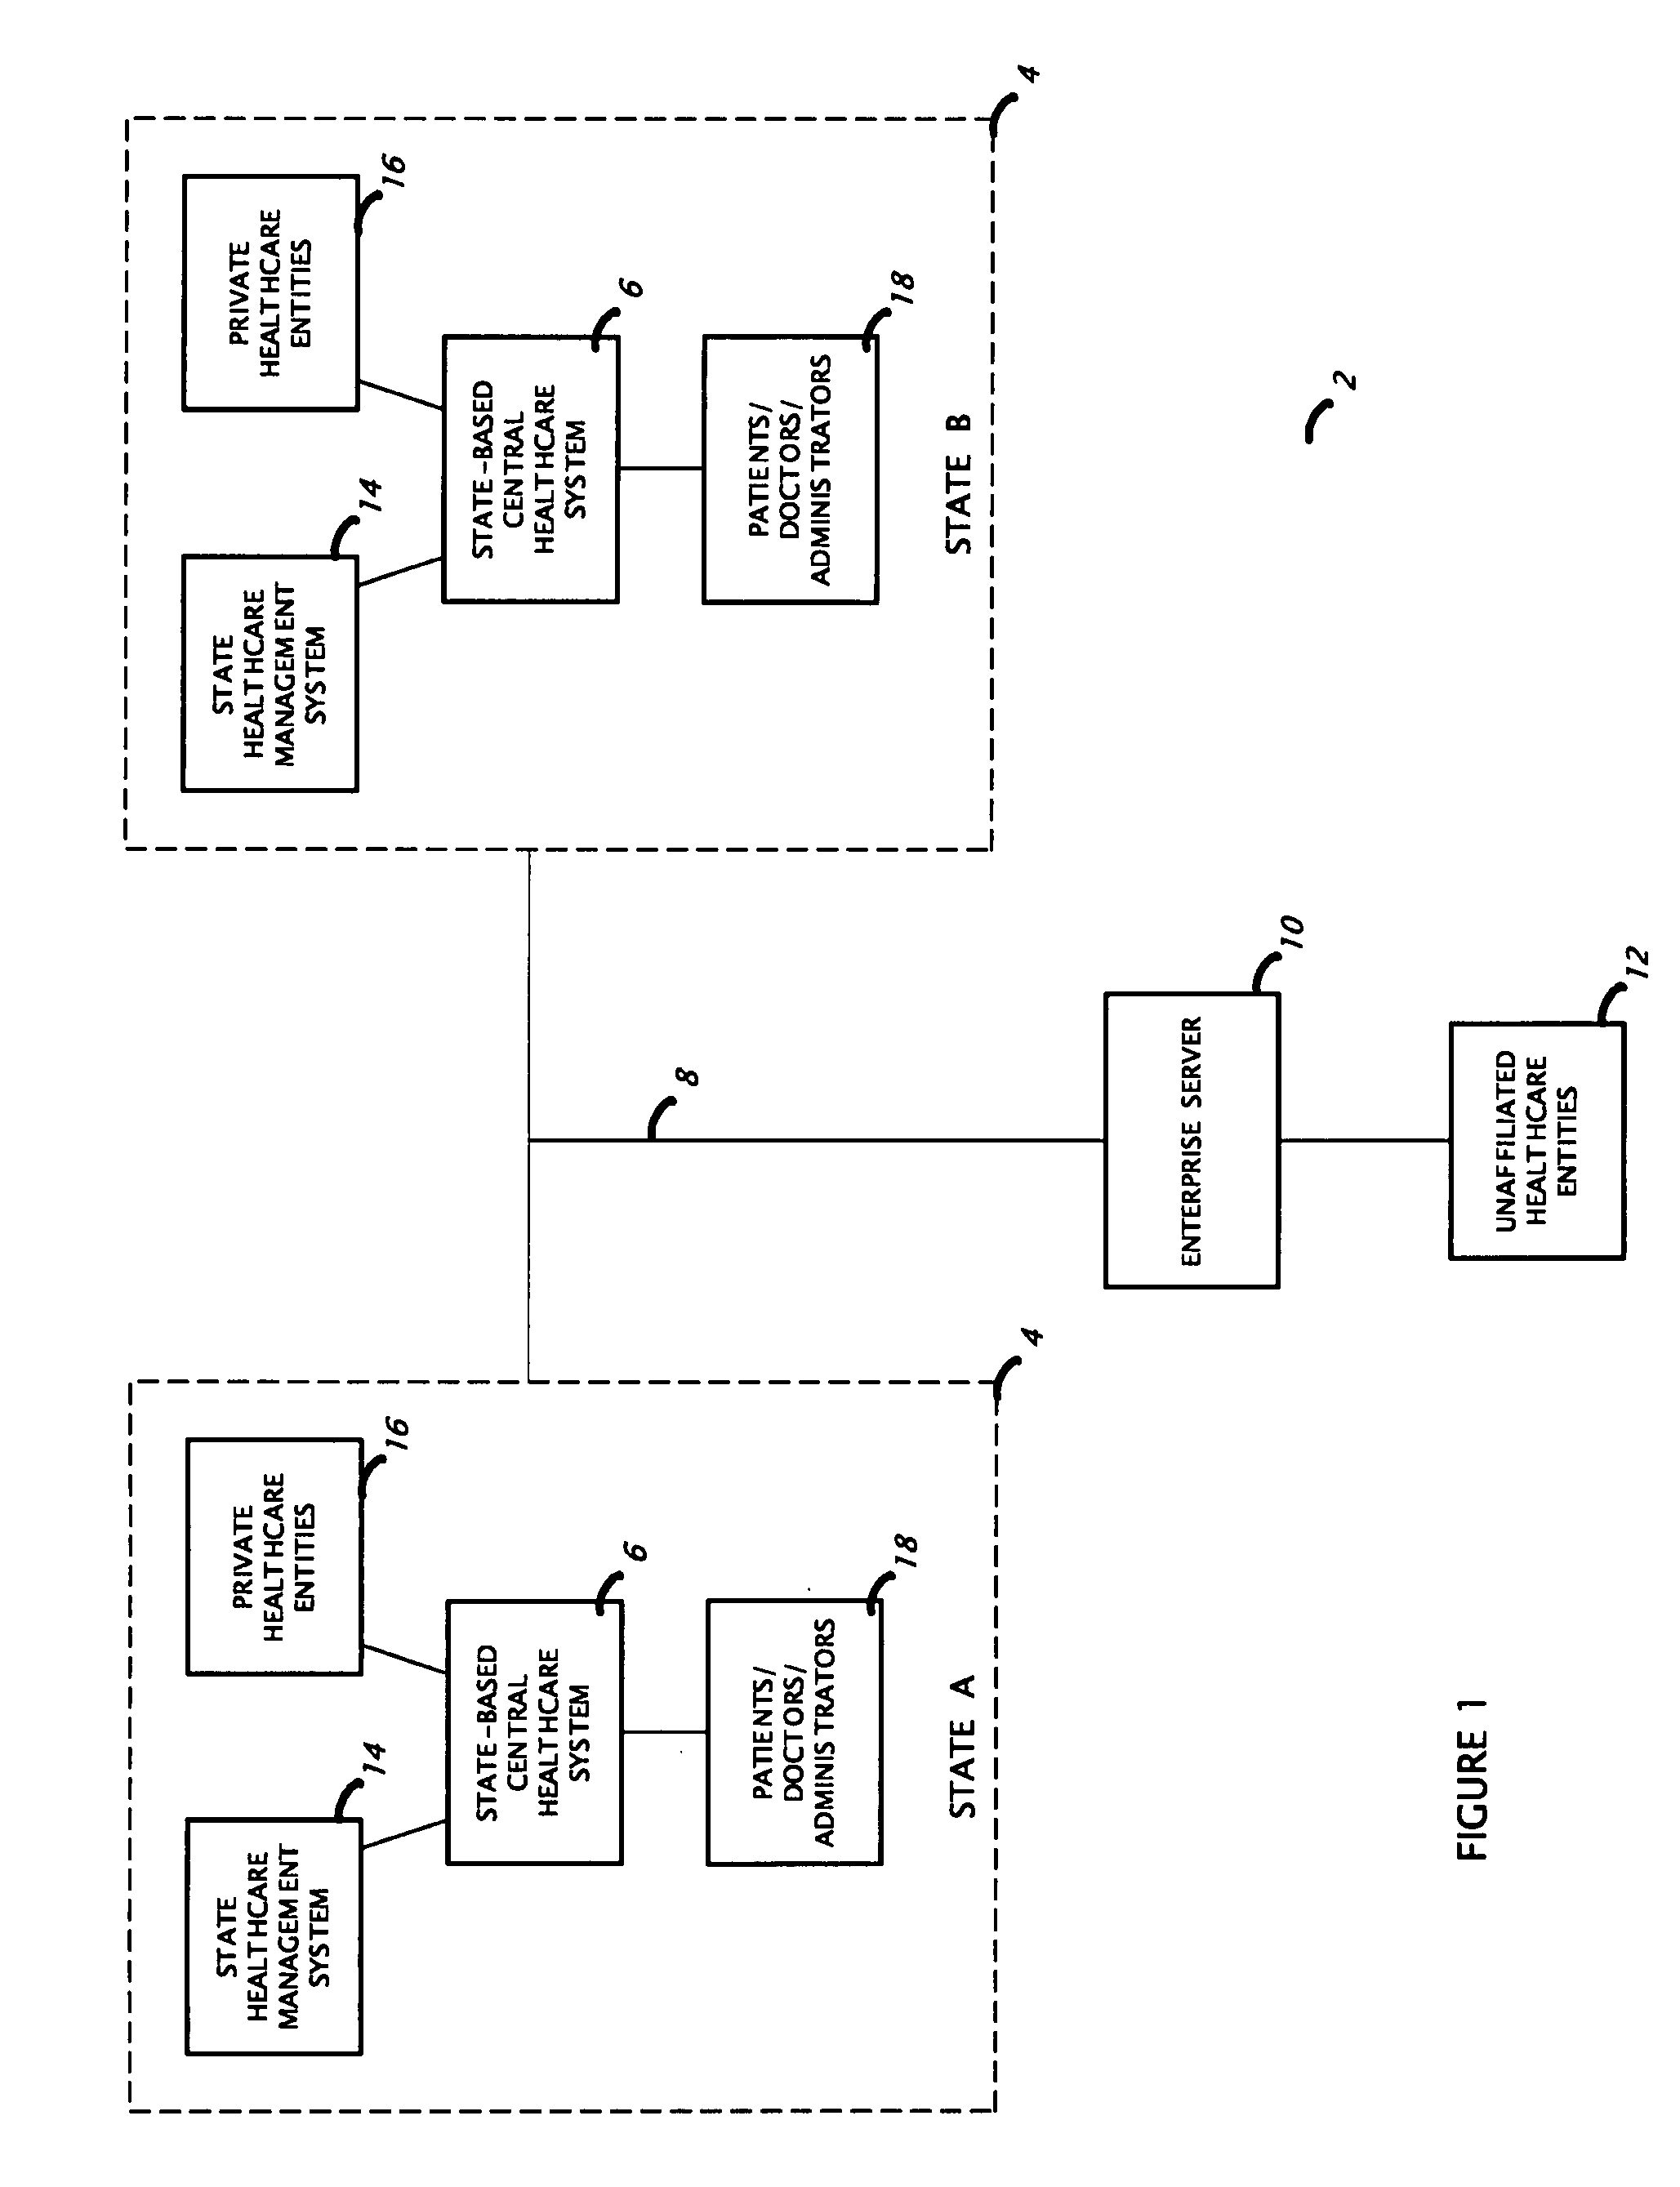 System and method for centralized management and monitoring of healthcare services